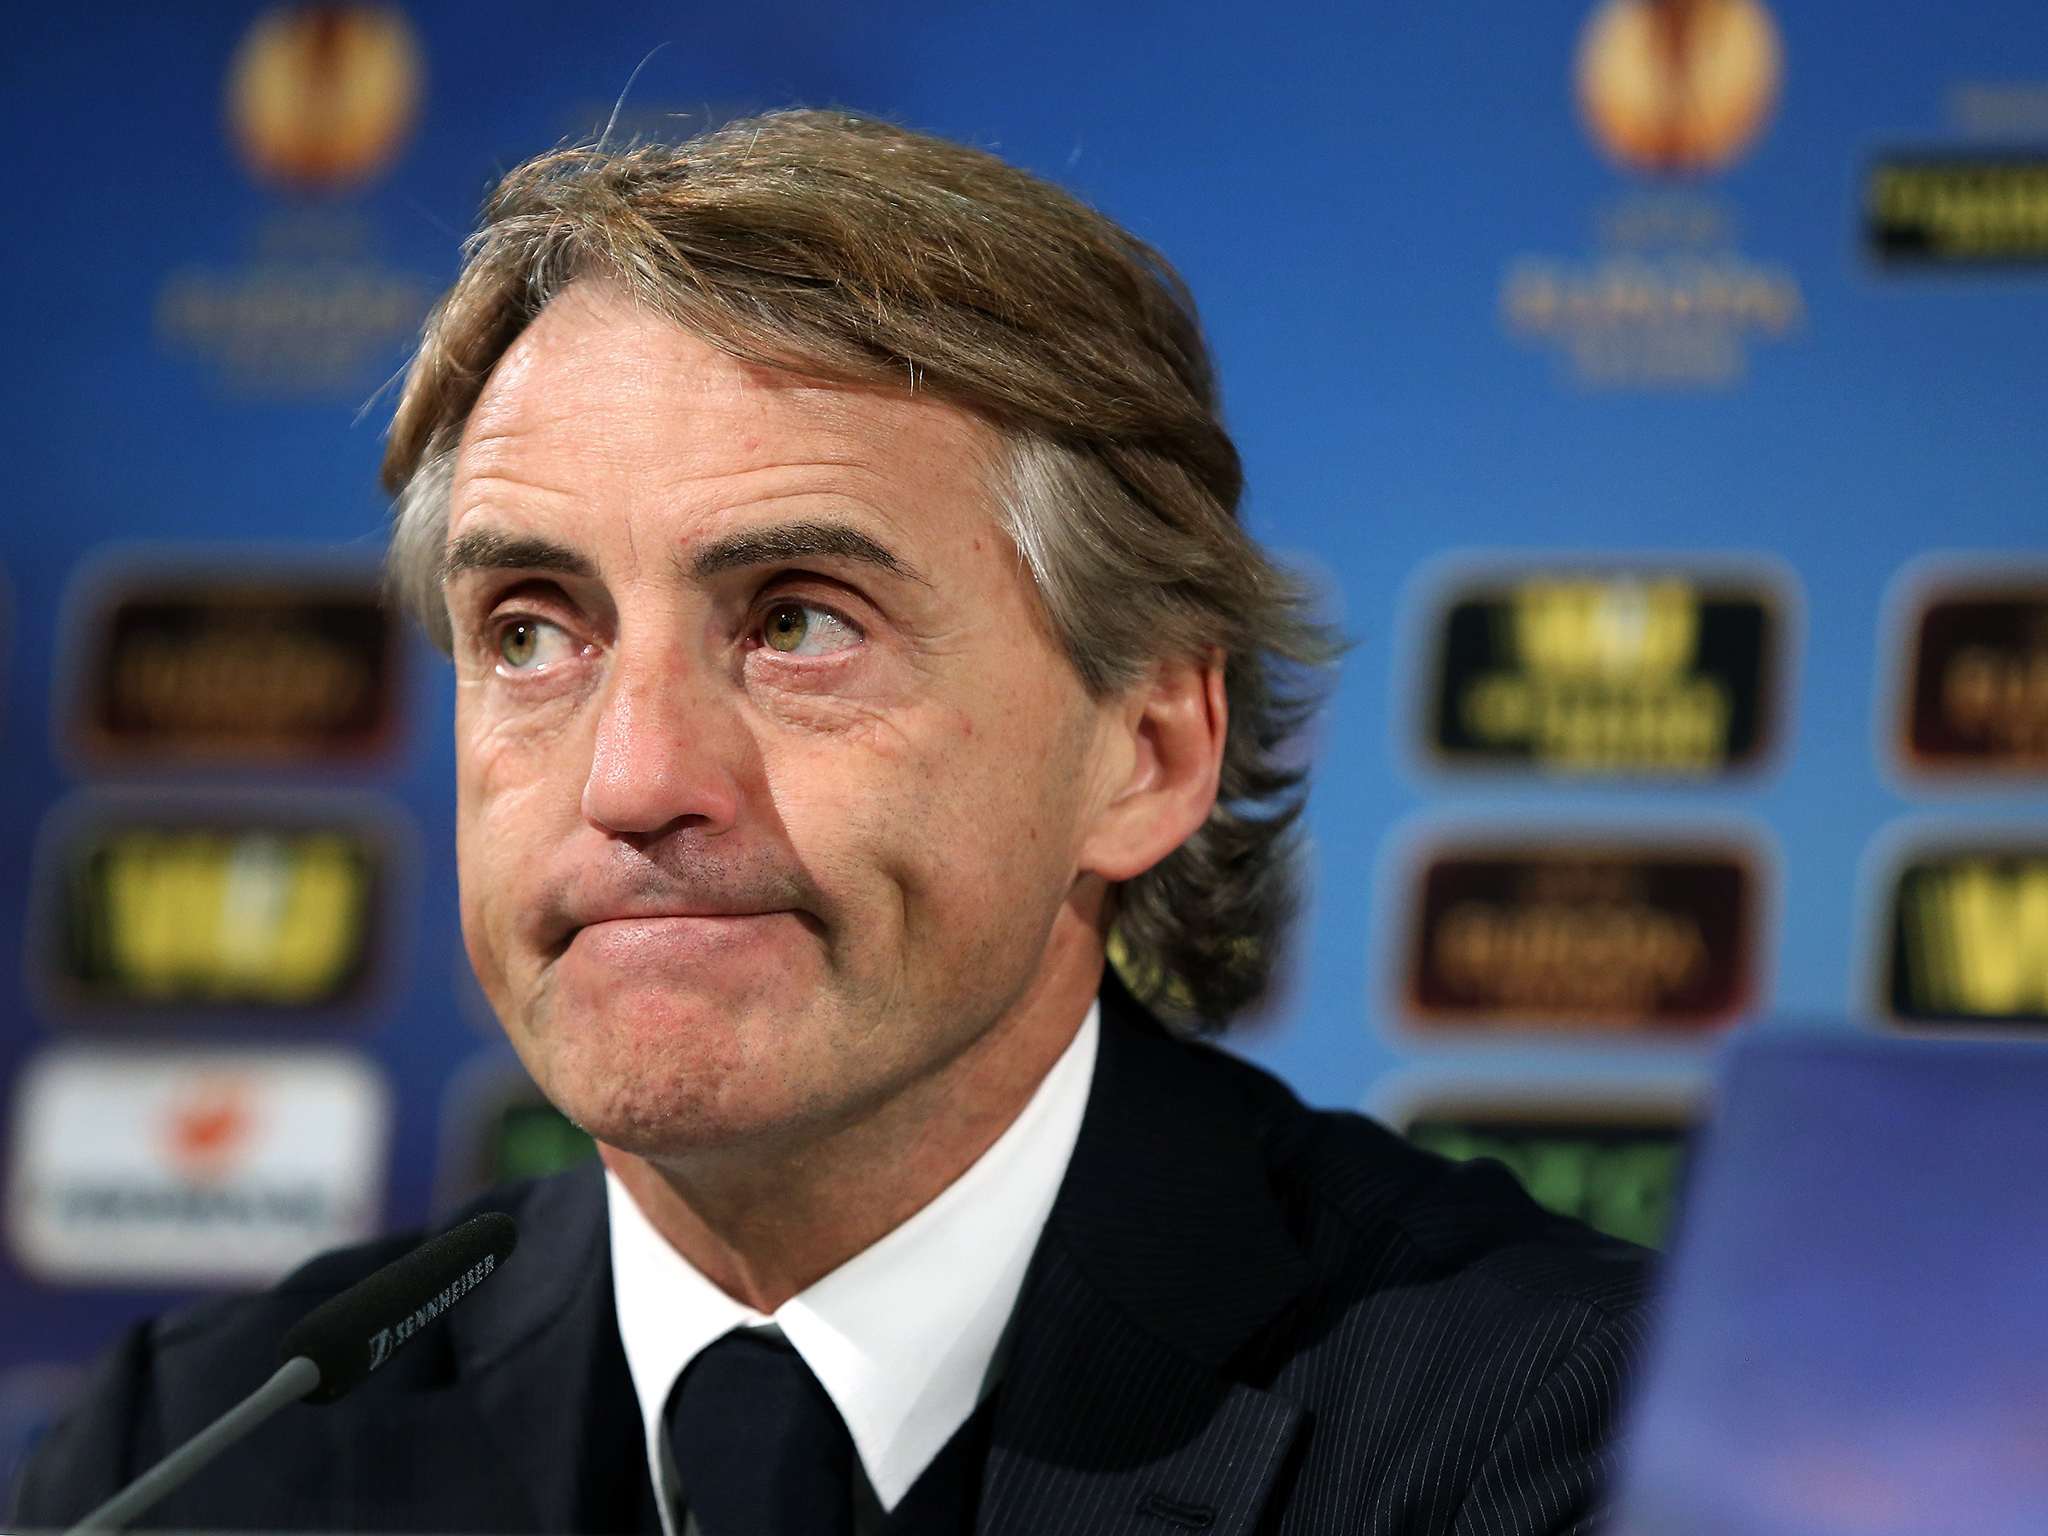 Mancini to MP: “Football should be played with the brain”